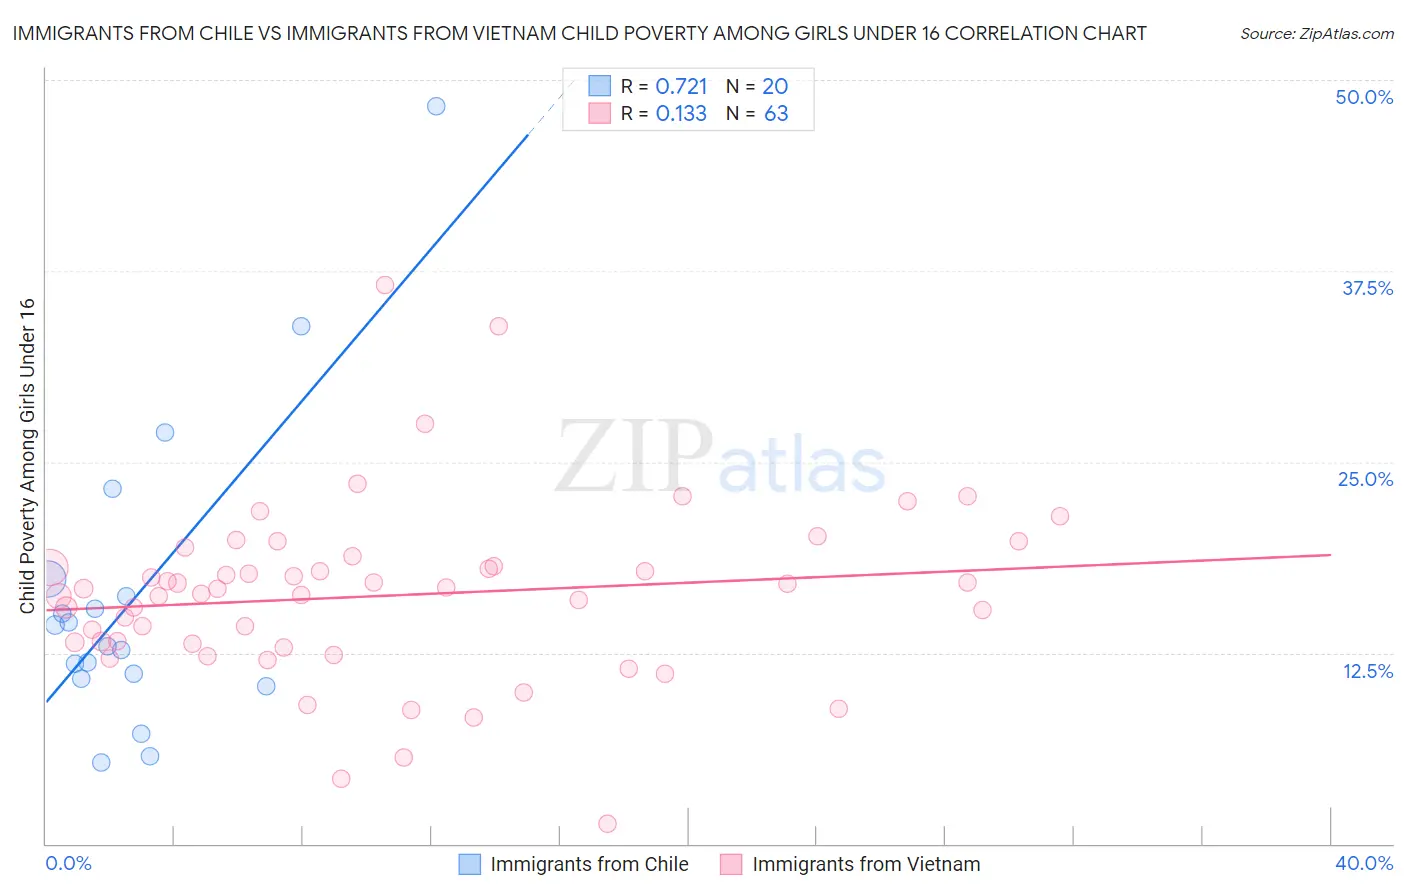 Immigrants from Chile vs Immigrants from Vietnam Child Poverty Among Girls Under 16